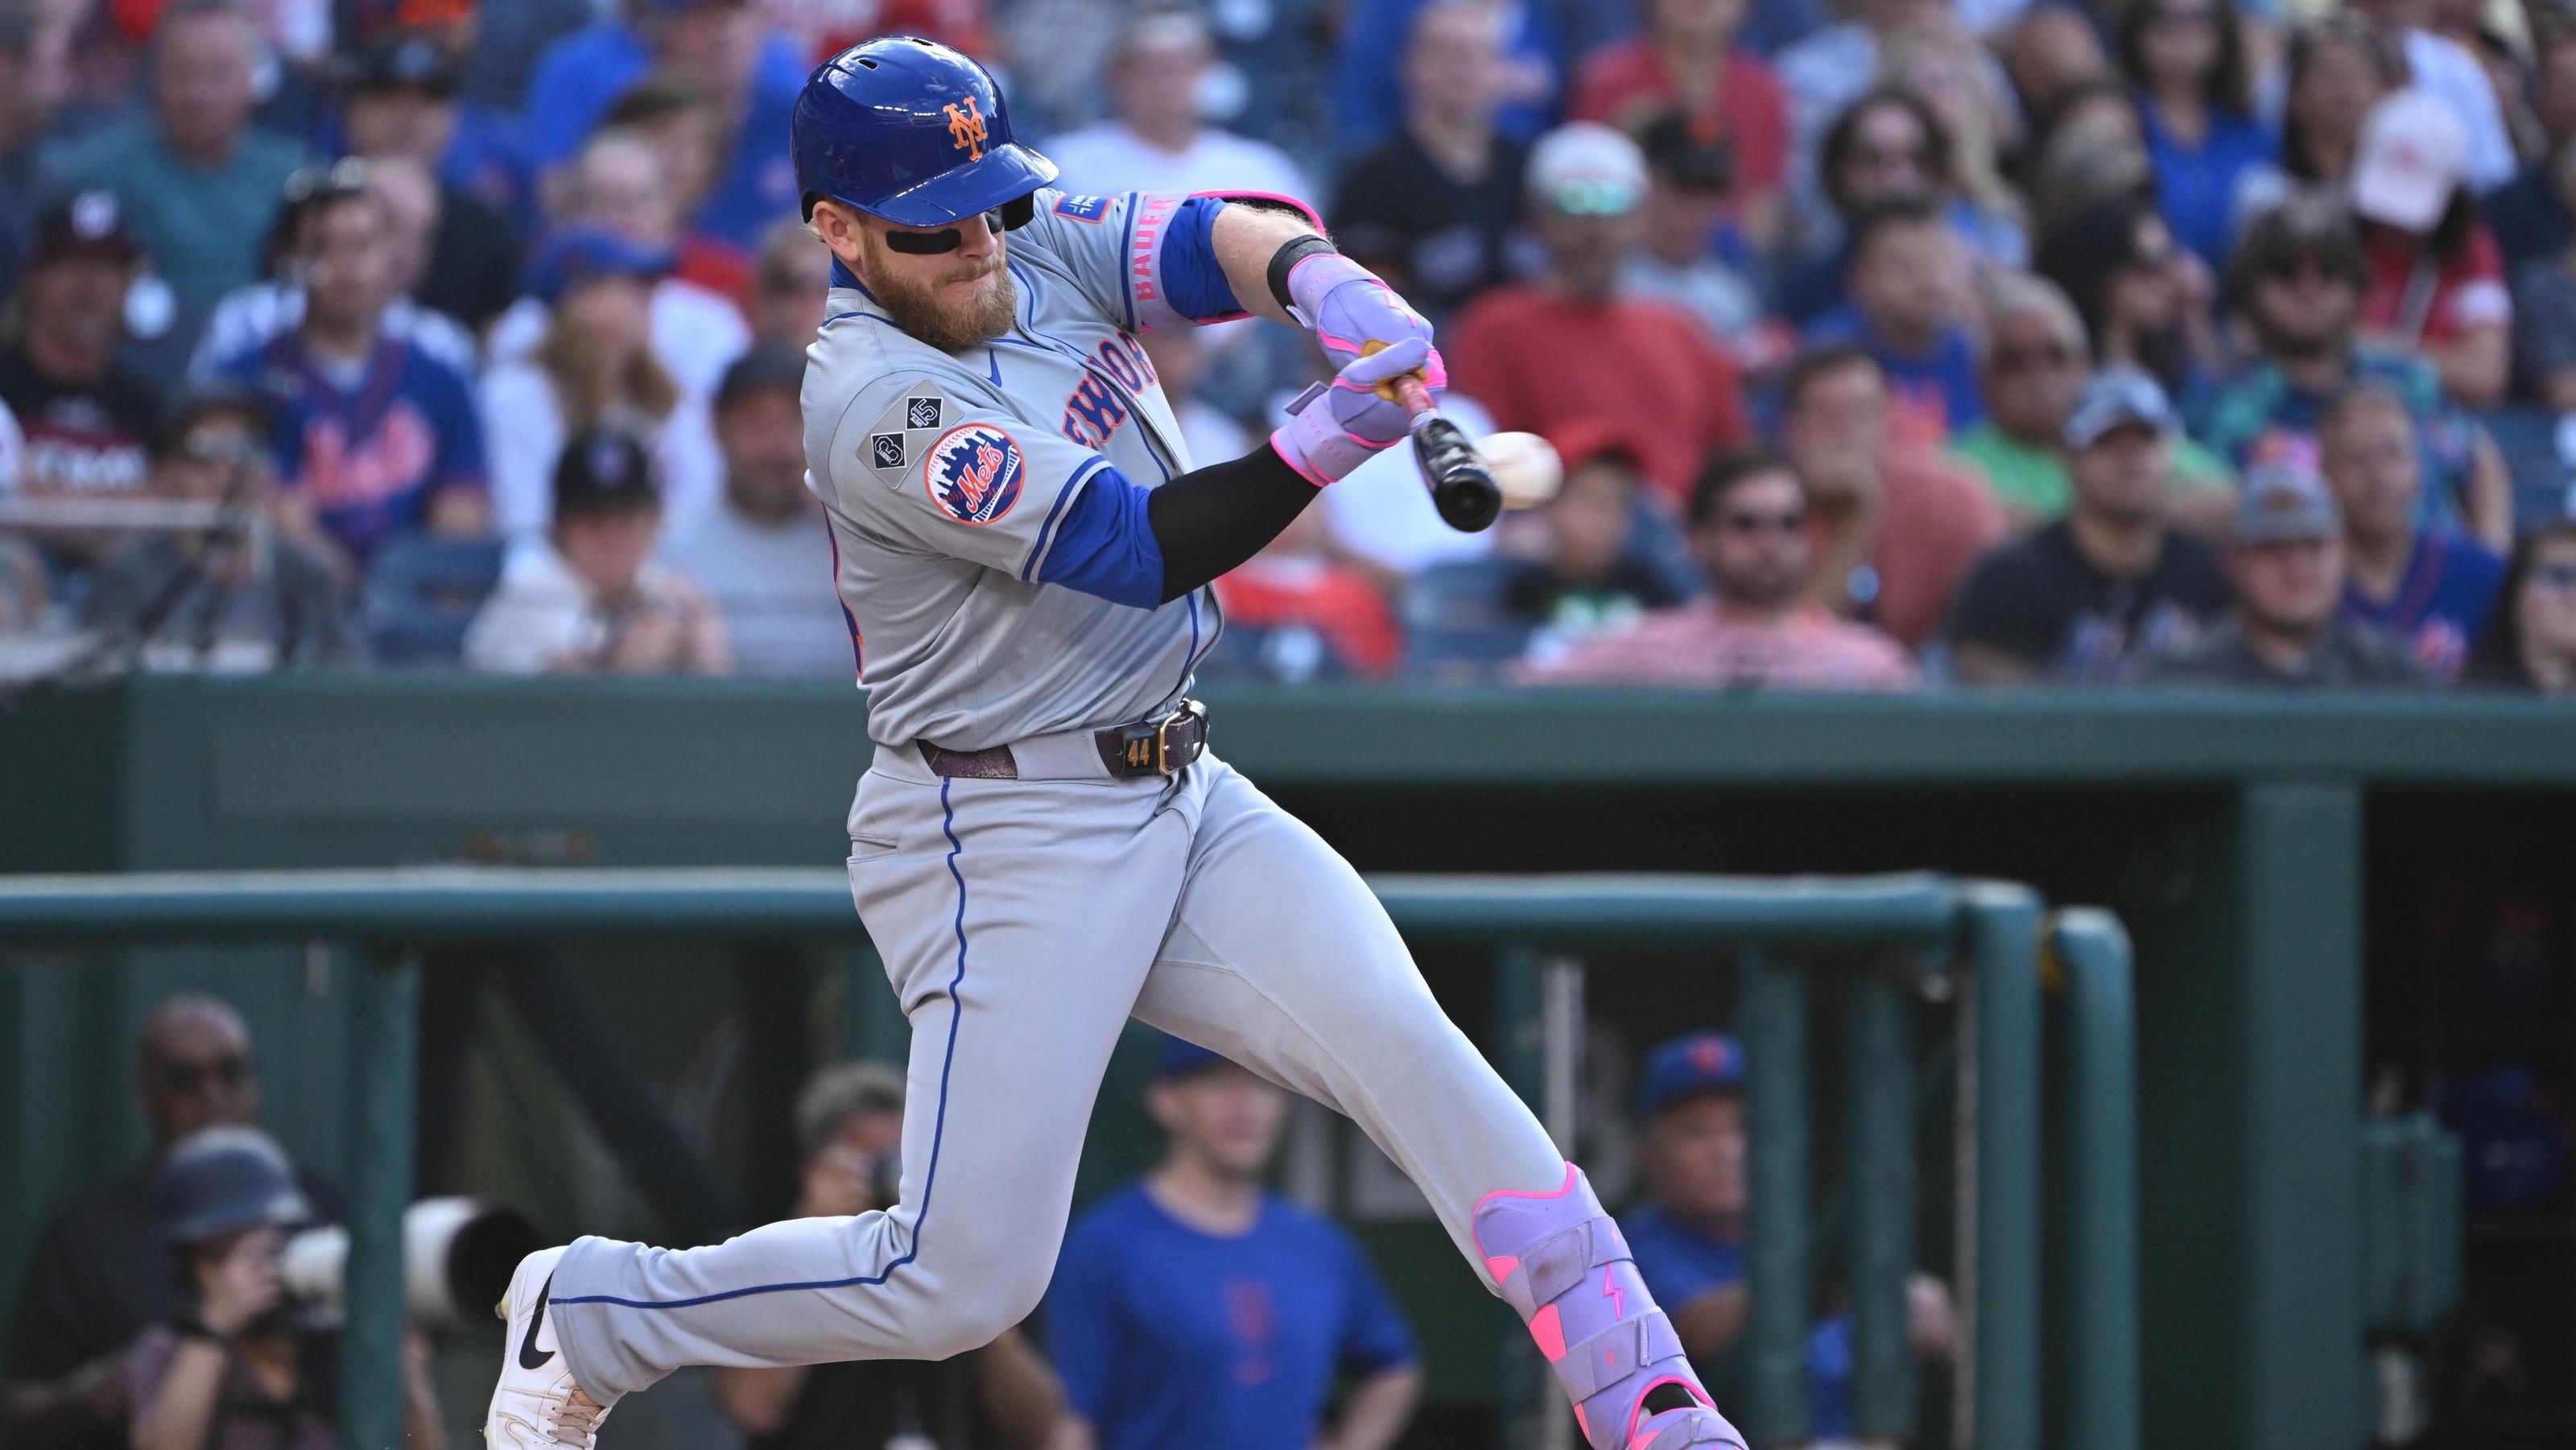 Mets score six runs in 10th inning, hang on to beat Nationals, 9-7